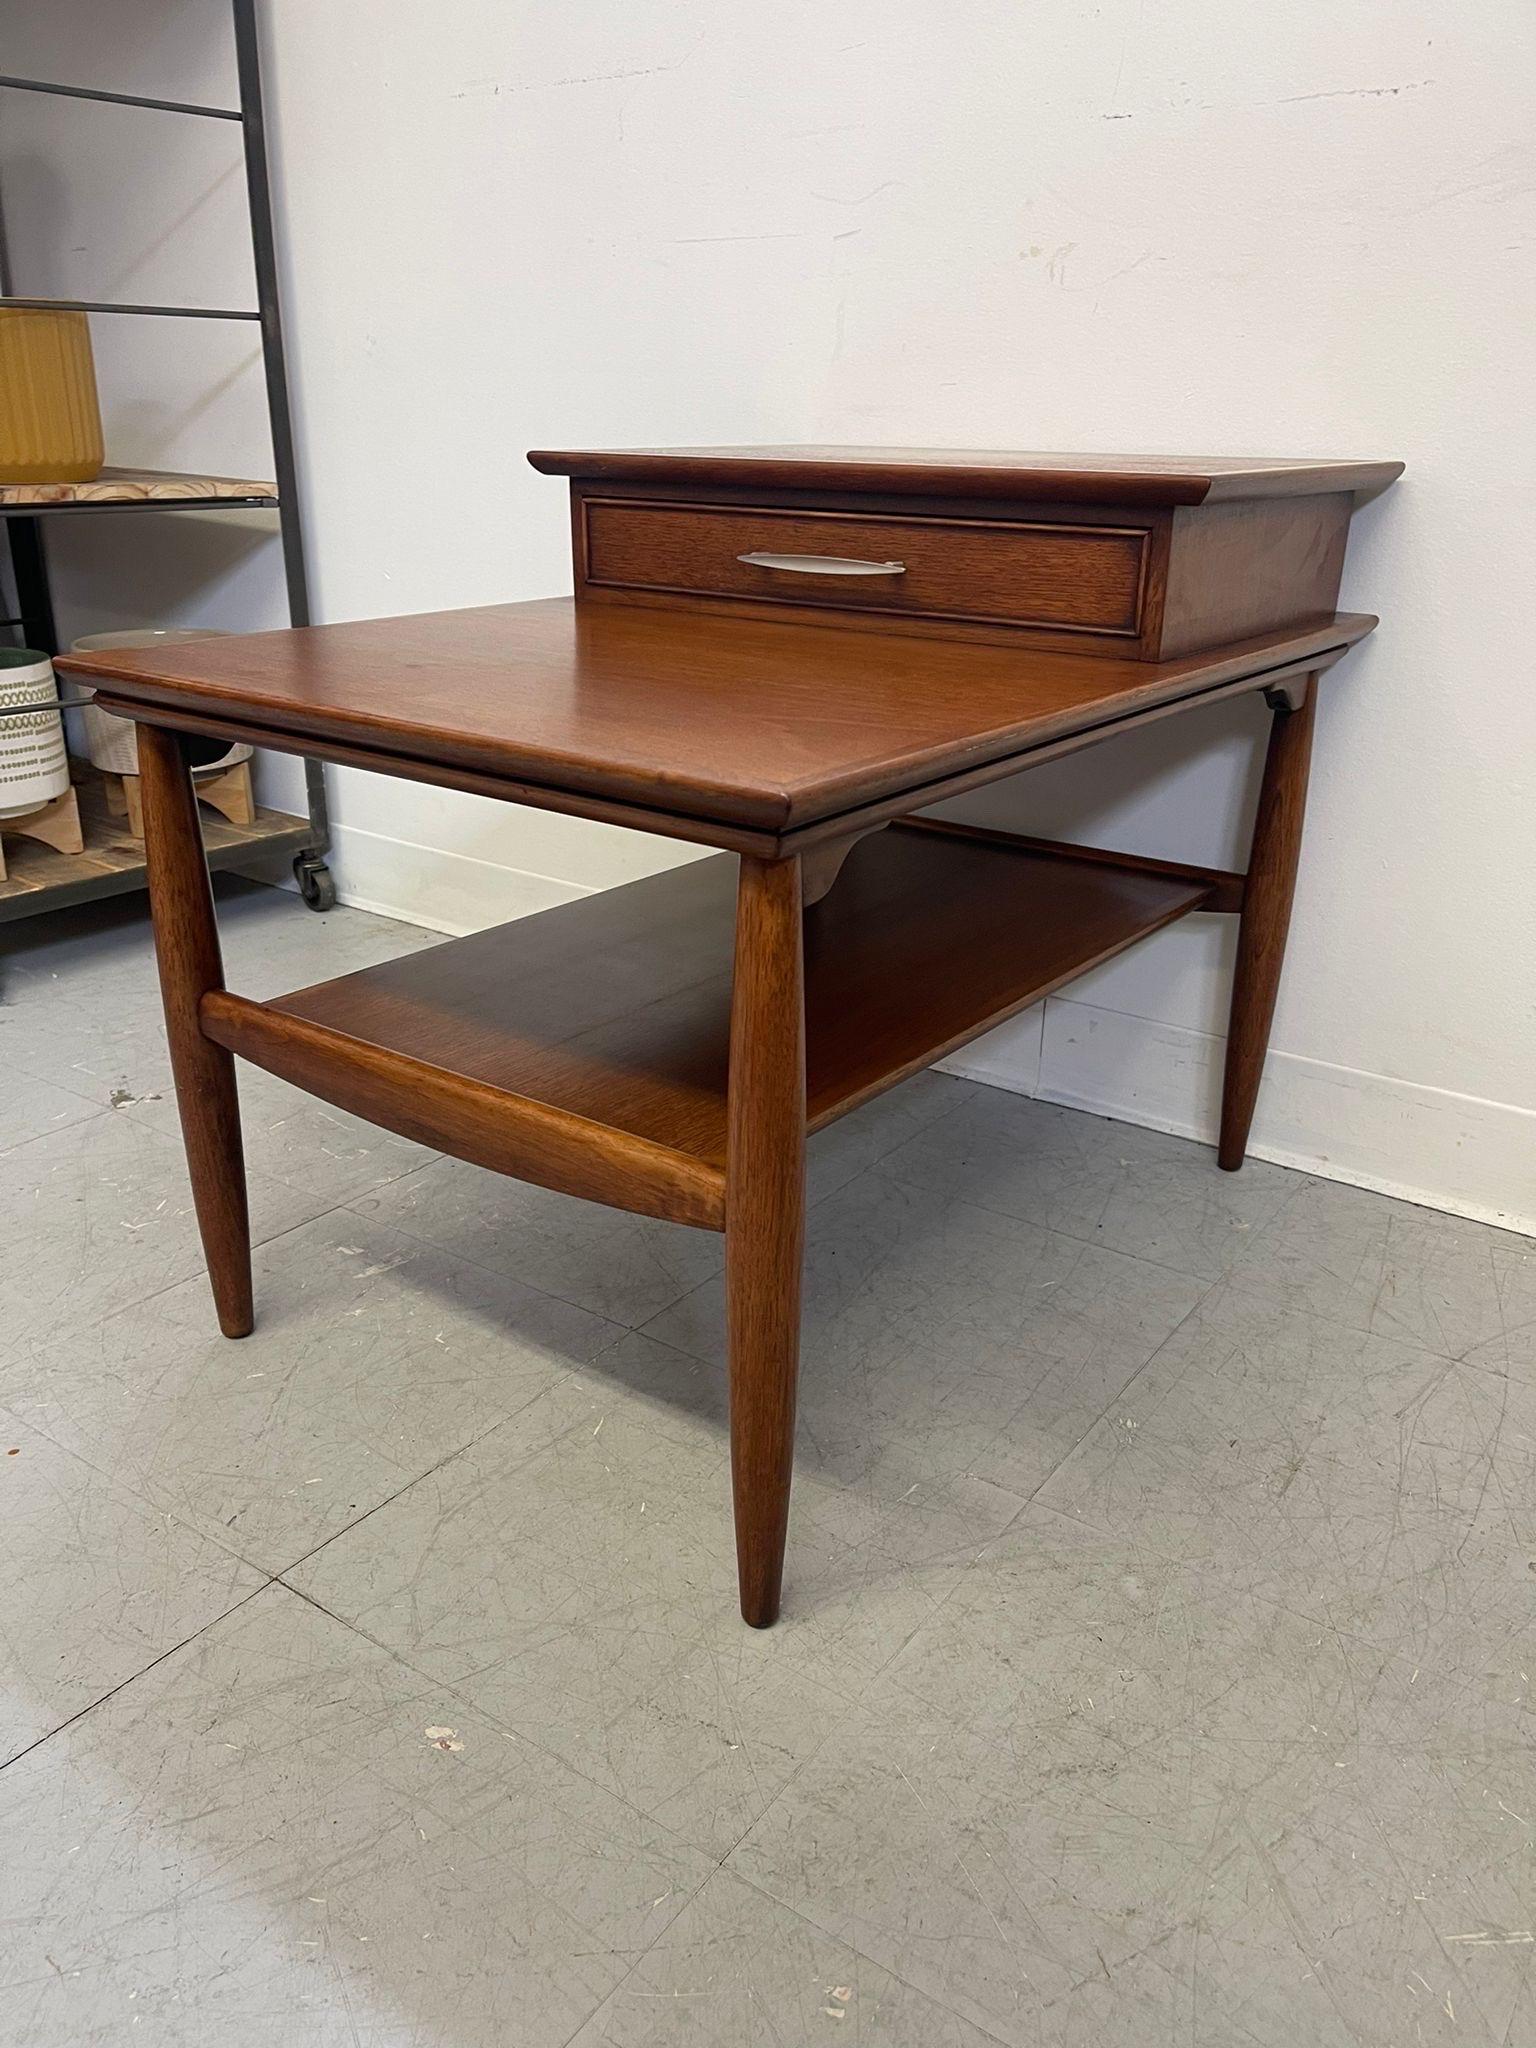 Walnut toned End Table with beautiful edge banding, dovetailed drawer, and tapered legs. Single drawer above open shelving. Makers mark located inside the drawer. Vintage Condition Consistent with Age as Pictured.

Dimensions. 29 W ; 21 D ; 23 H